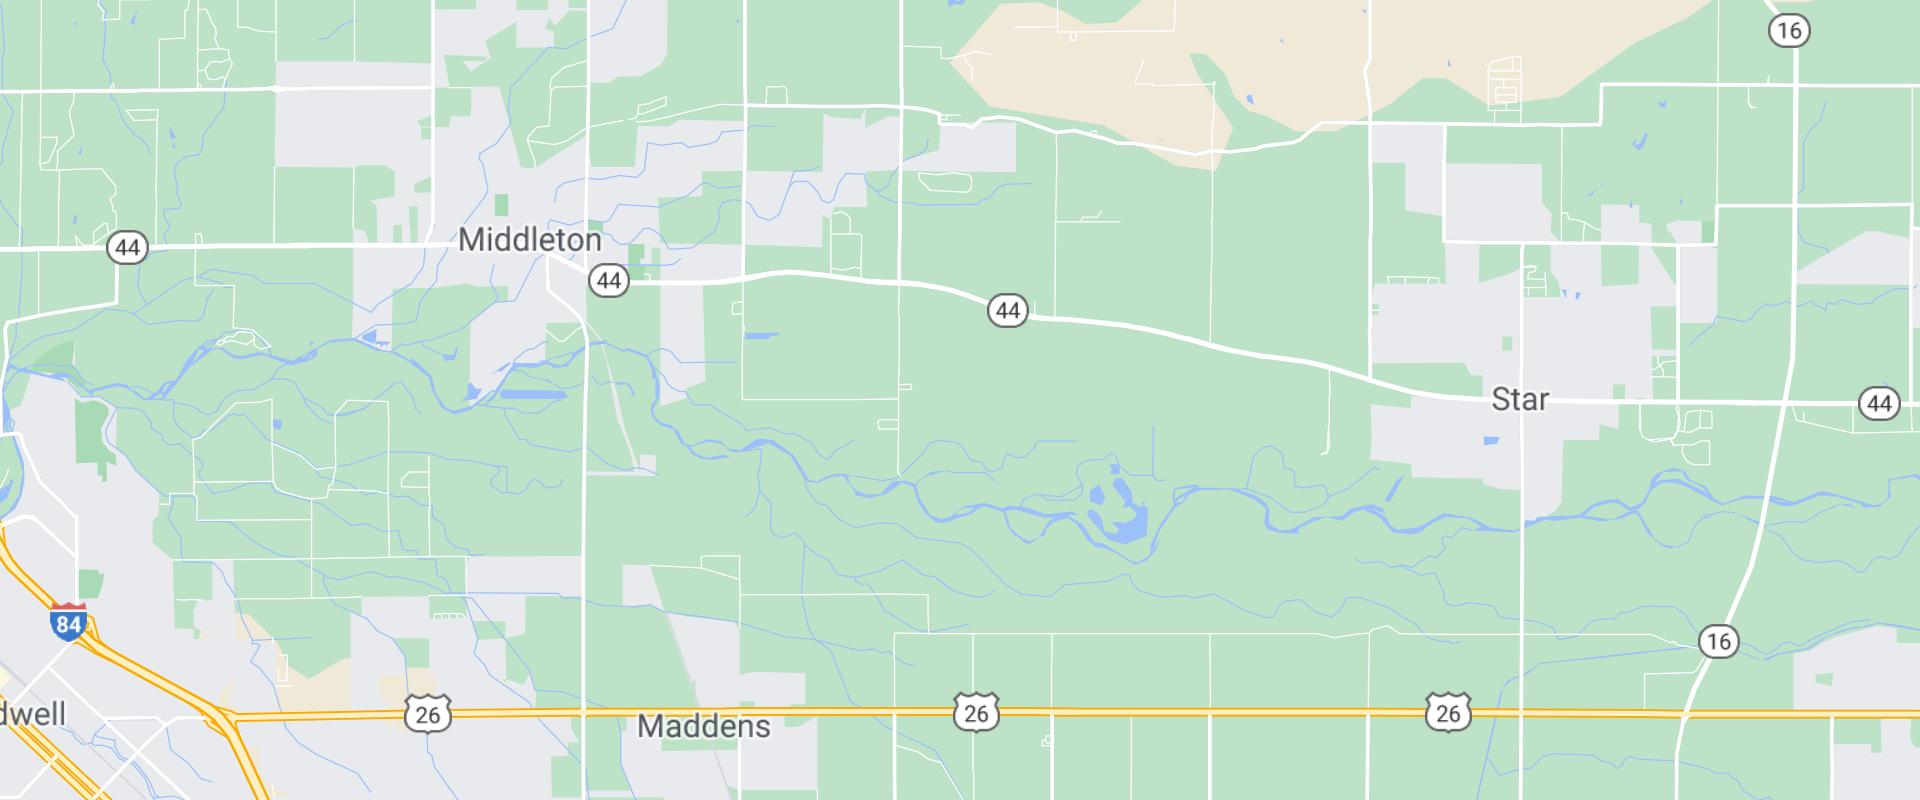 map of middleton and star idaho